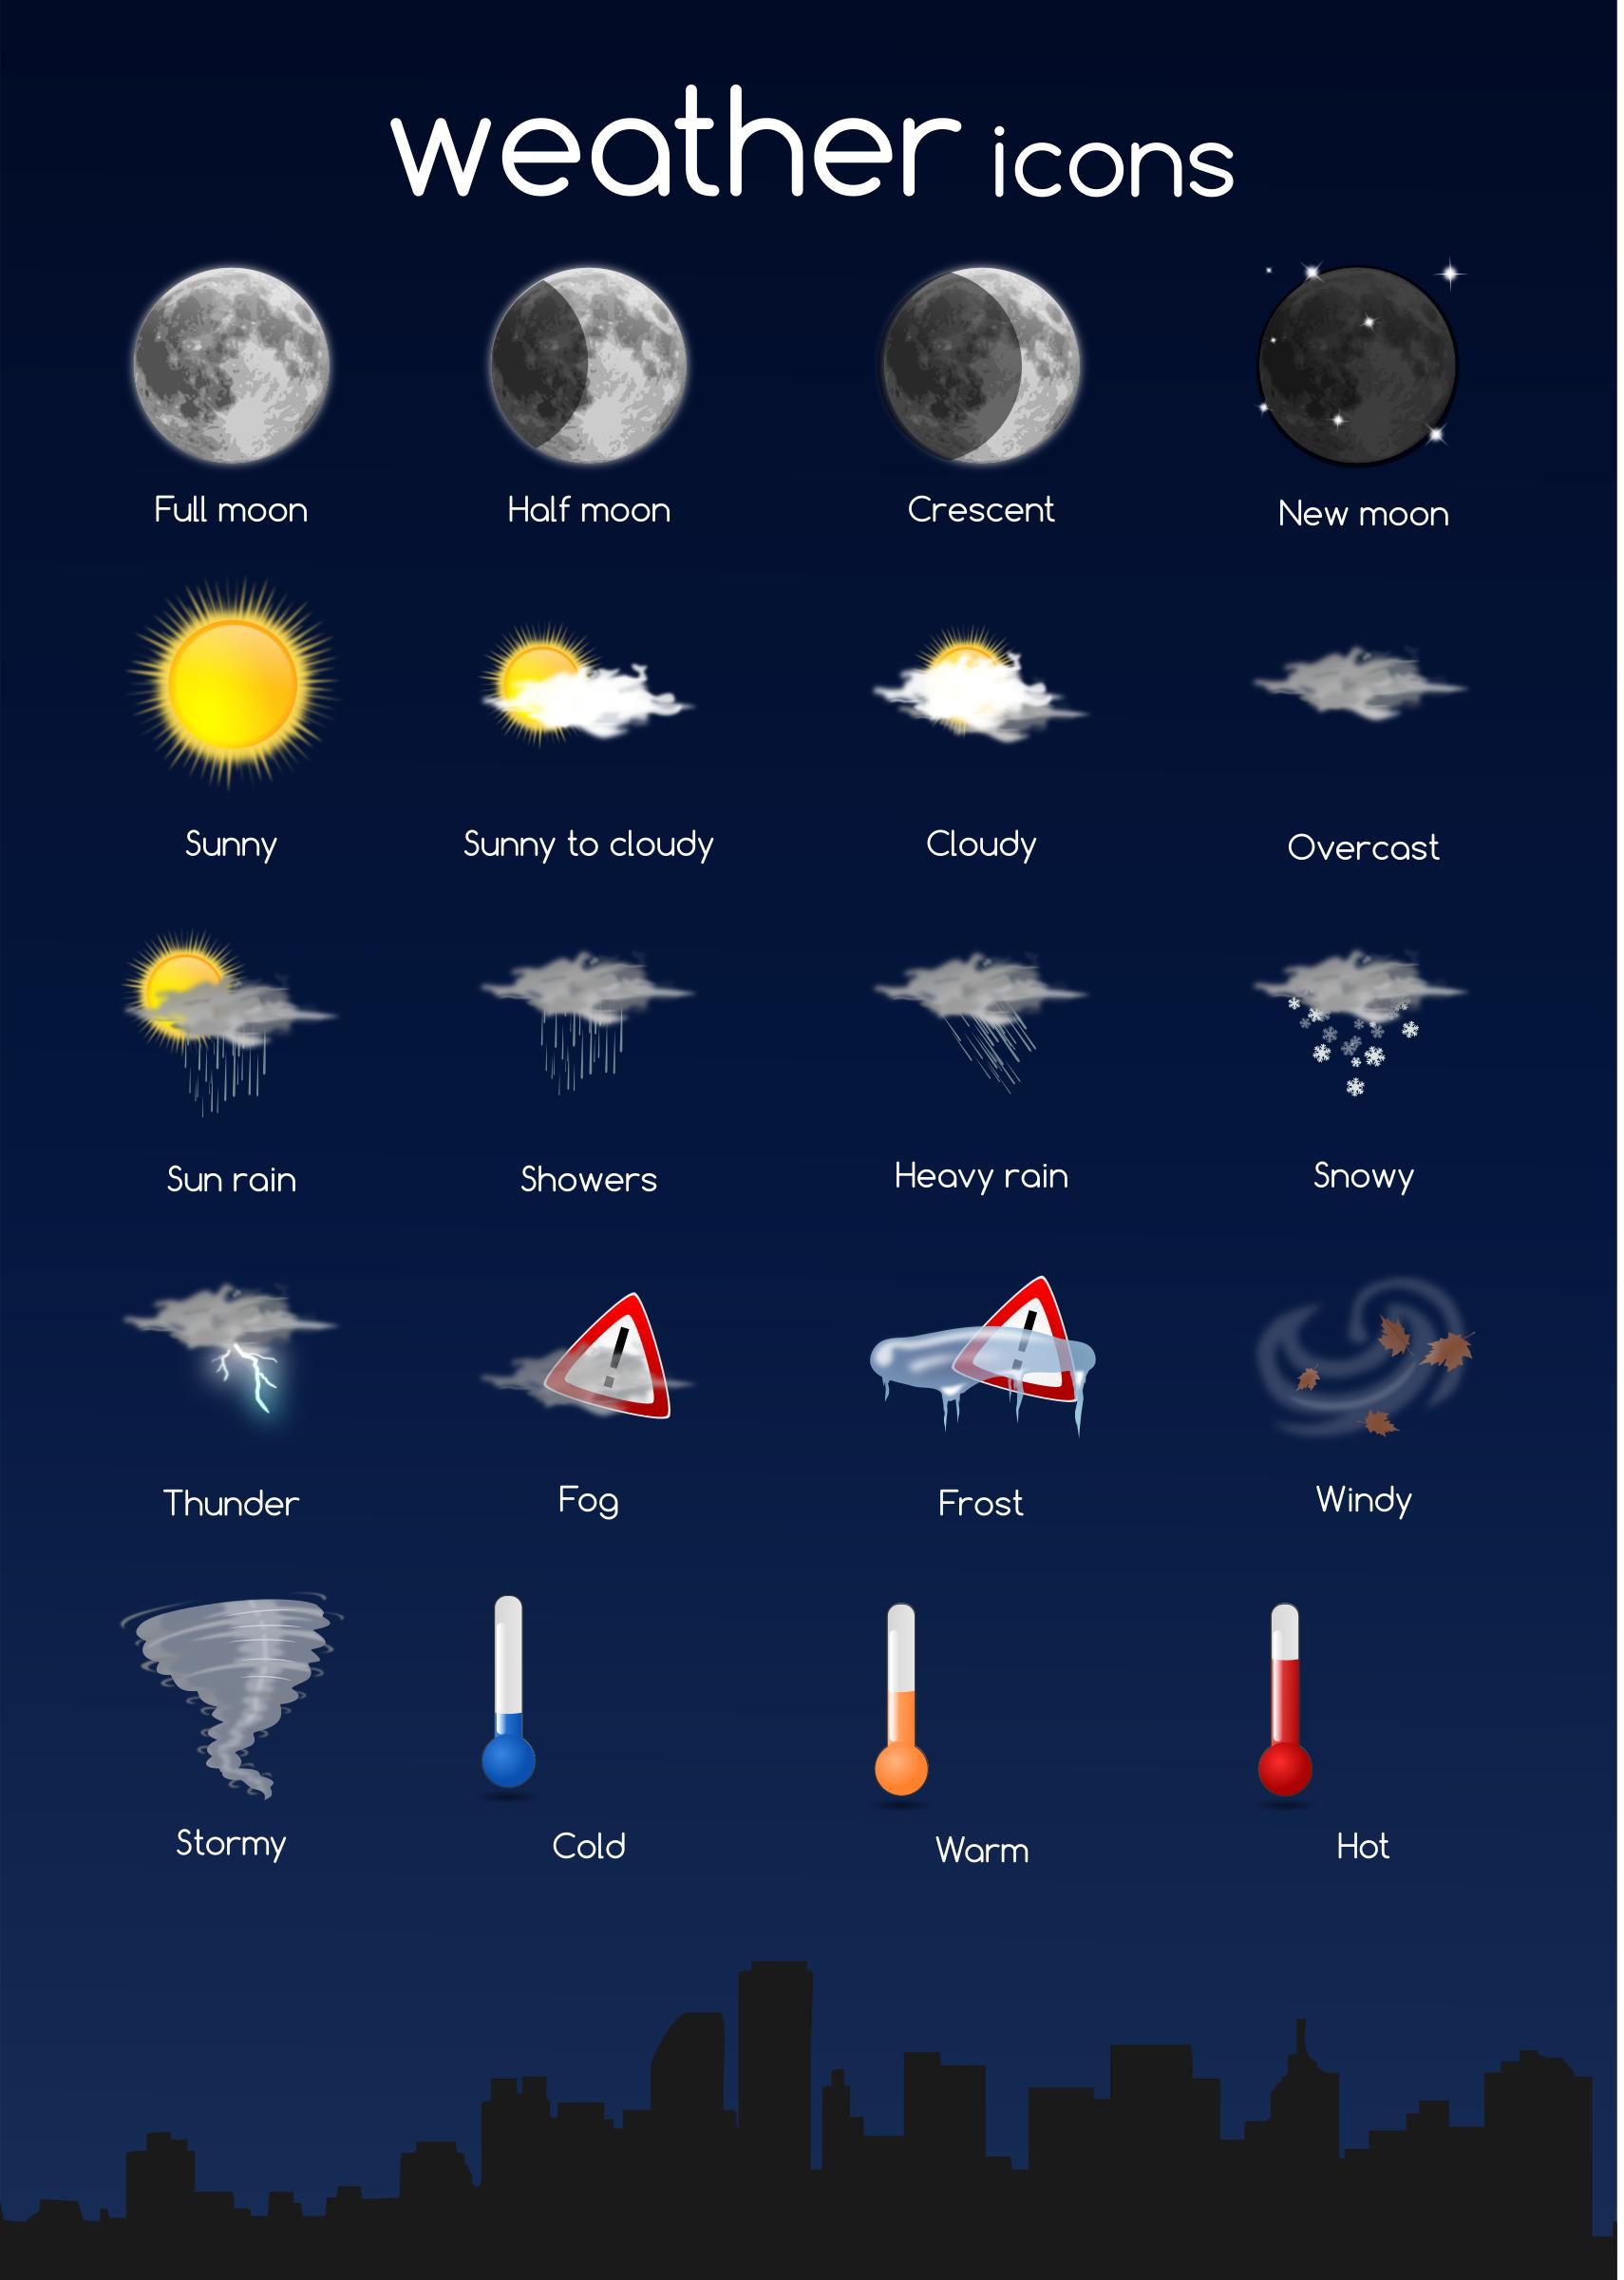 weather icon - complete set png